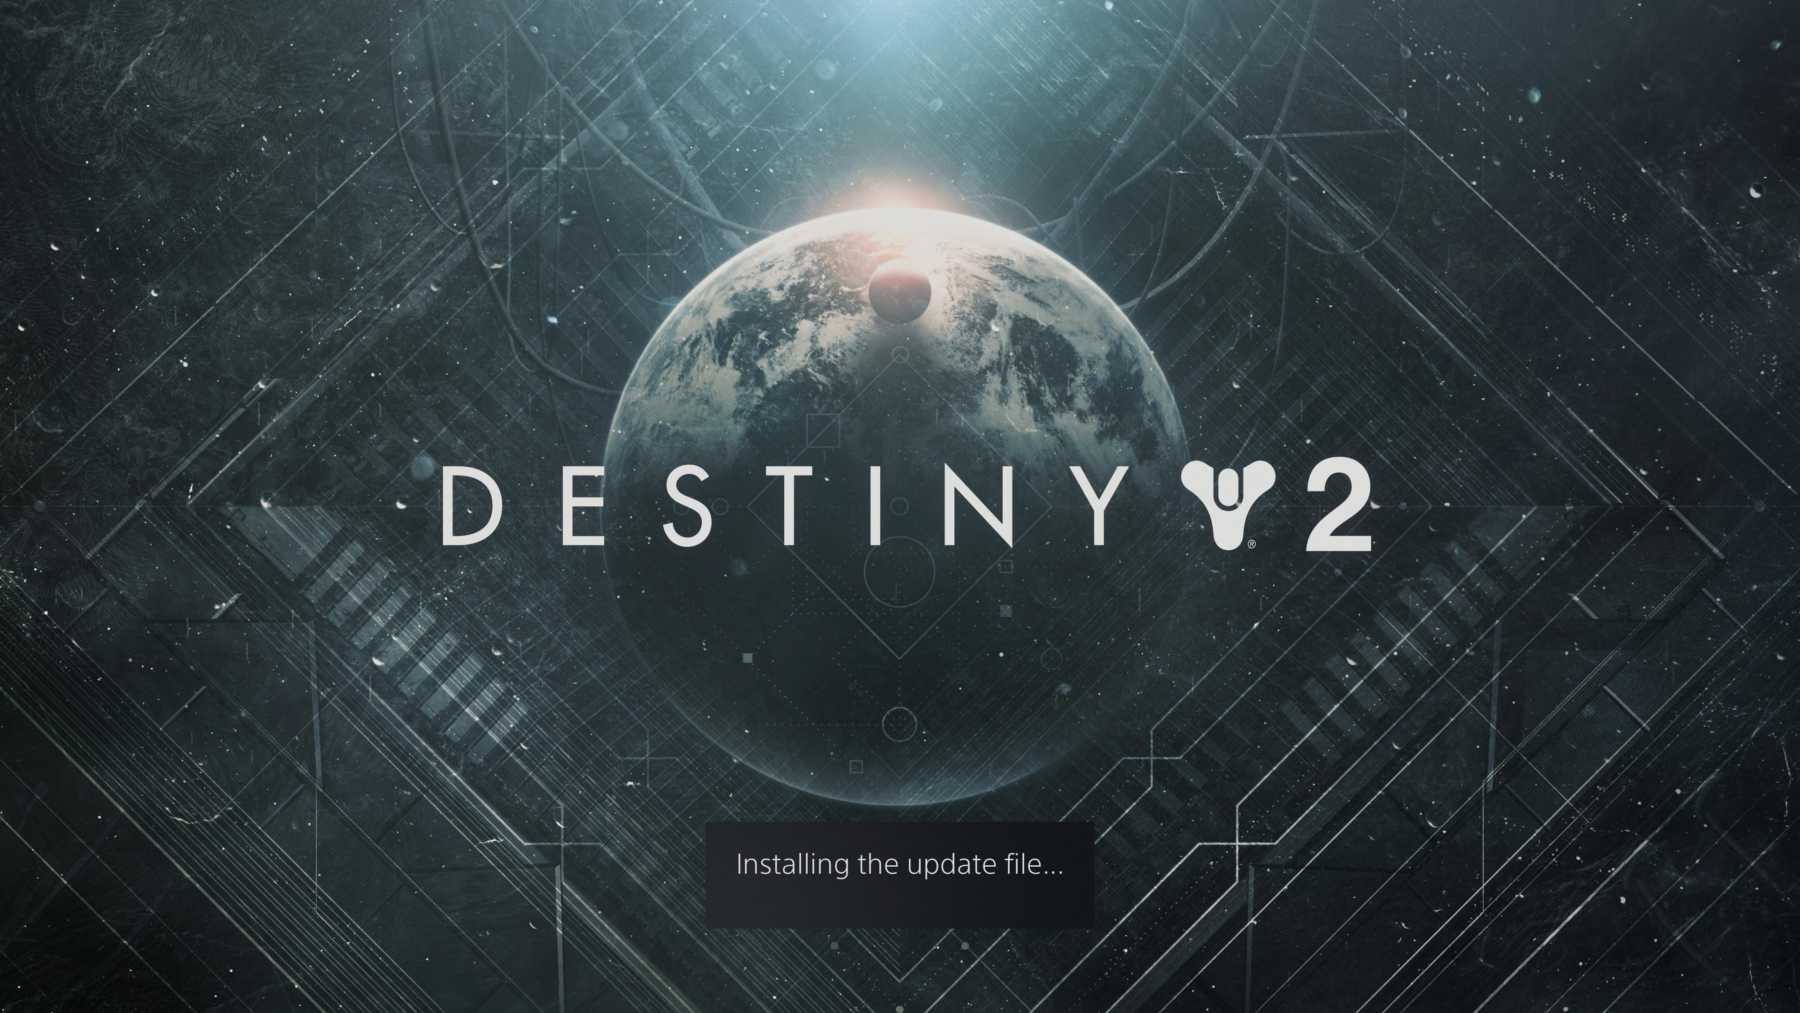 Destiny 2 Installing the update file